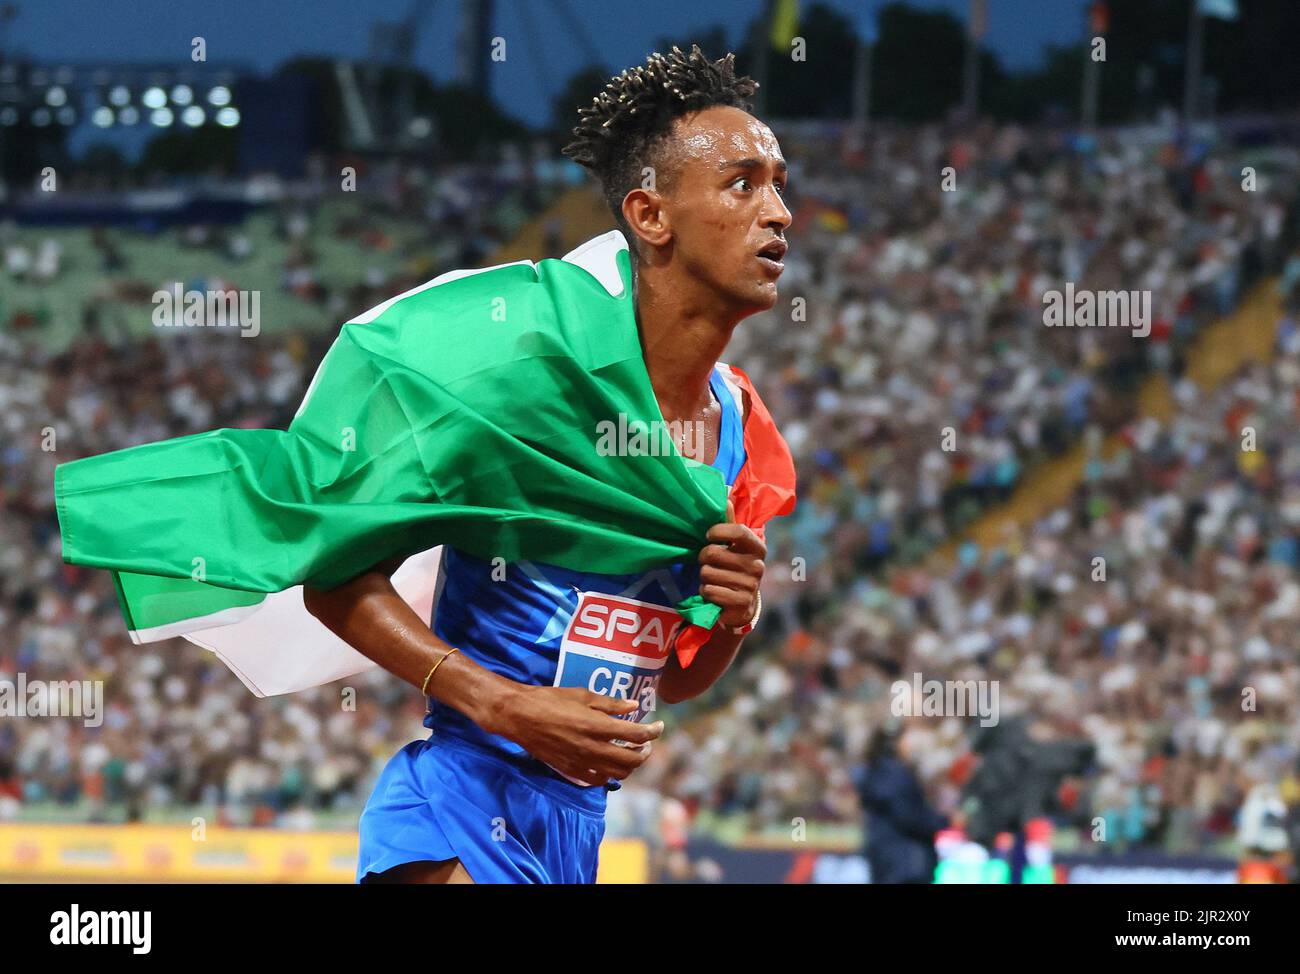 2022 European Championships - Athletics - Olympiastadion, Munich, Germany - August 21, 2022 Italy's Yemaneberhan Crippa celebrates after winning gold in the men's 10,000m final REUTERS/Wolfgang Rattay Stock Photo